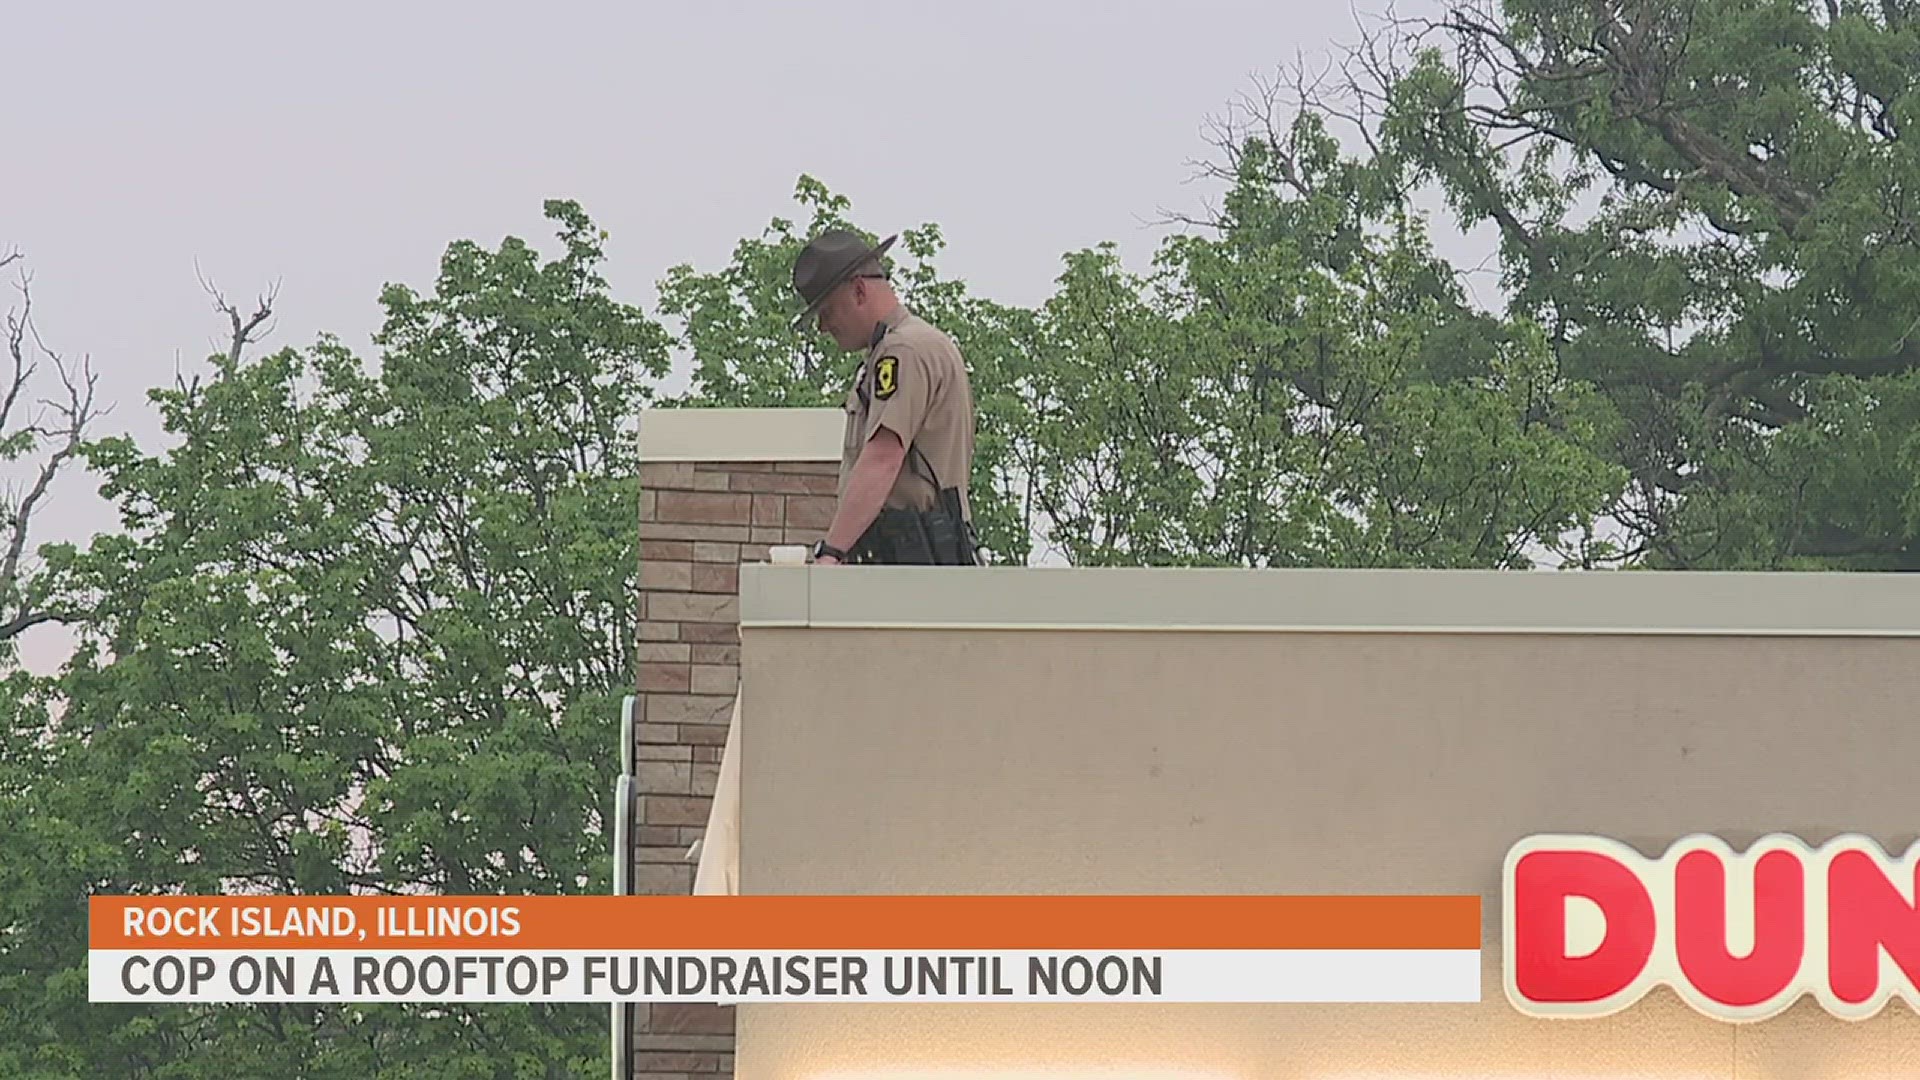 Since the program began, law enforcement in Iowa and Illinois have raised over $7.5 million.